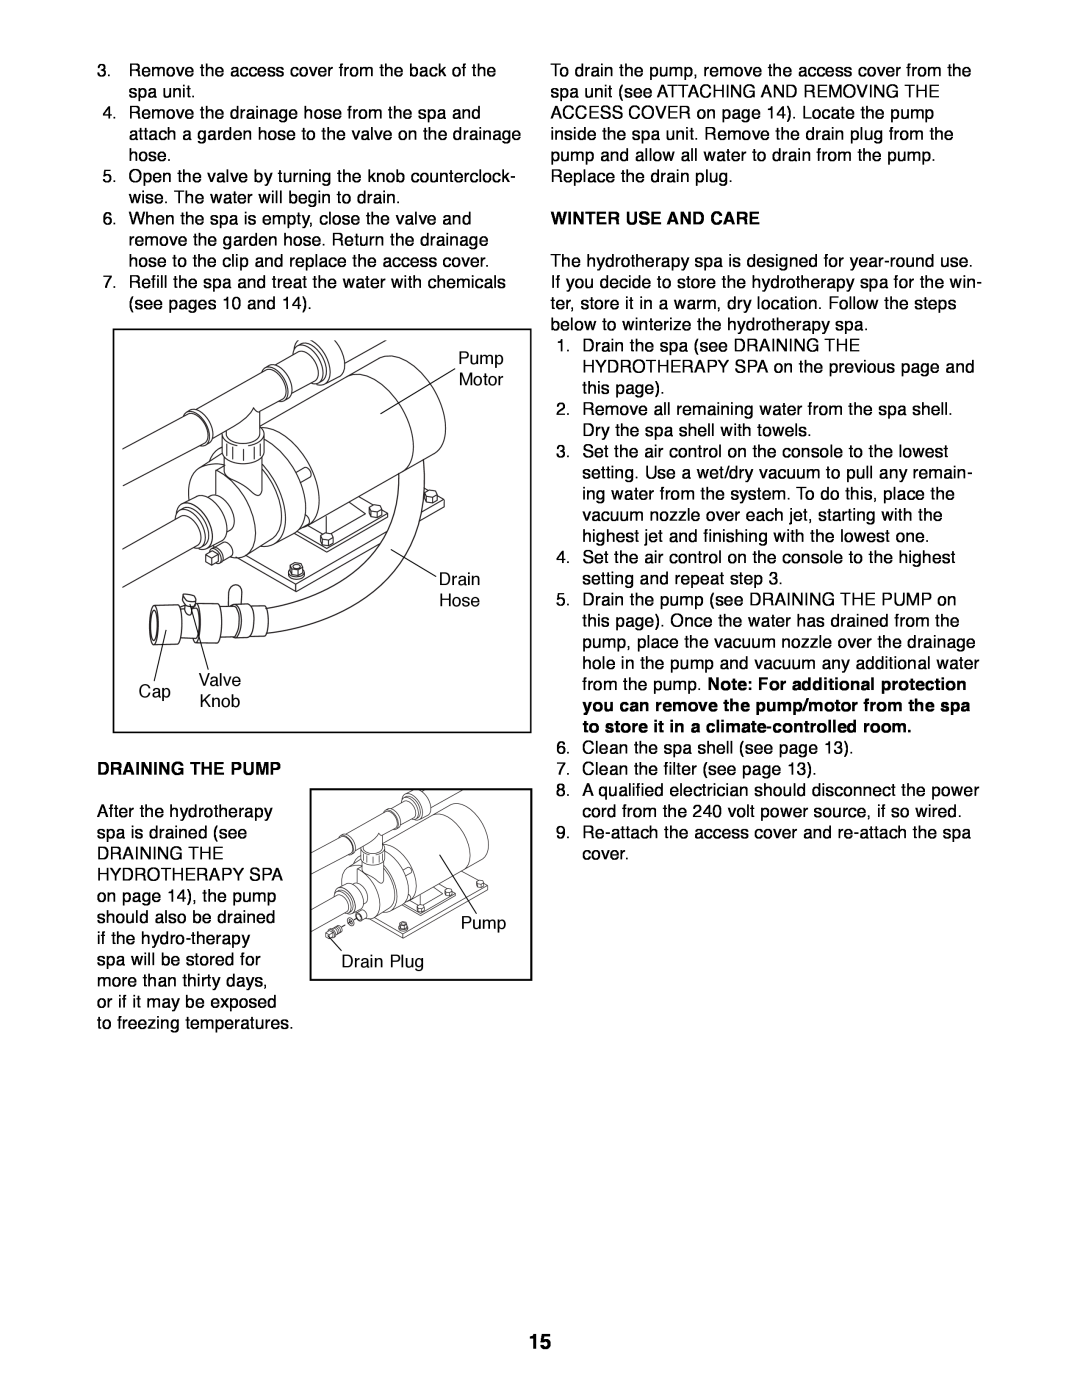 Weslo WLHS86090 manual Winter Use And Care, from the pump. Note For additional protection, Draining The Pump 